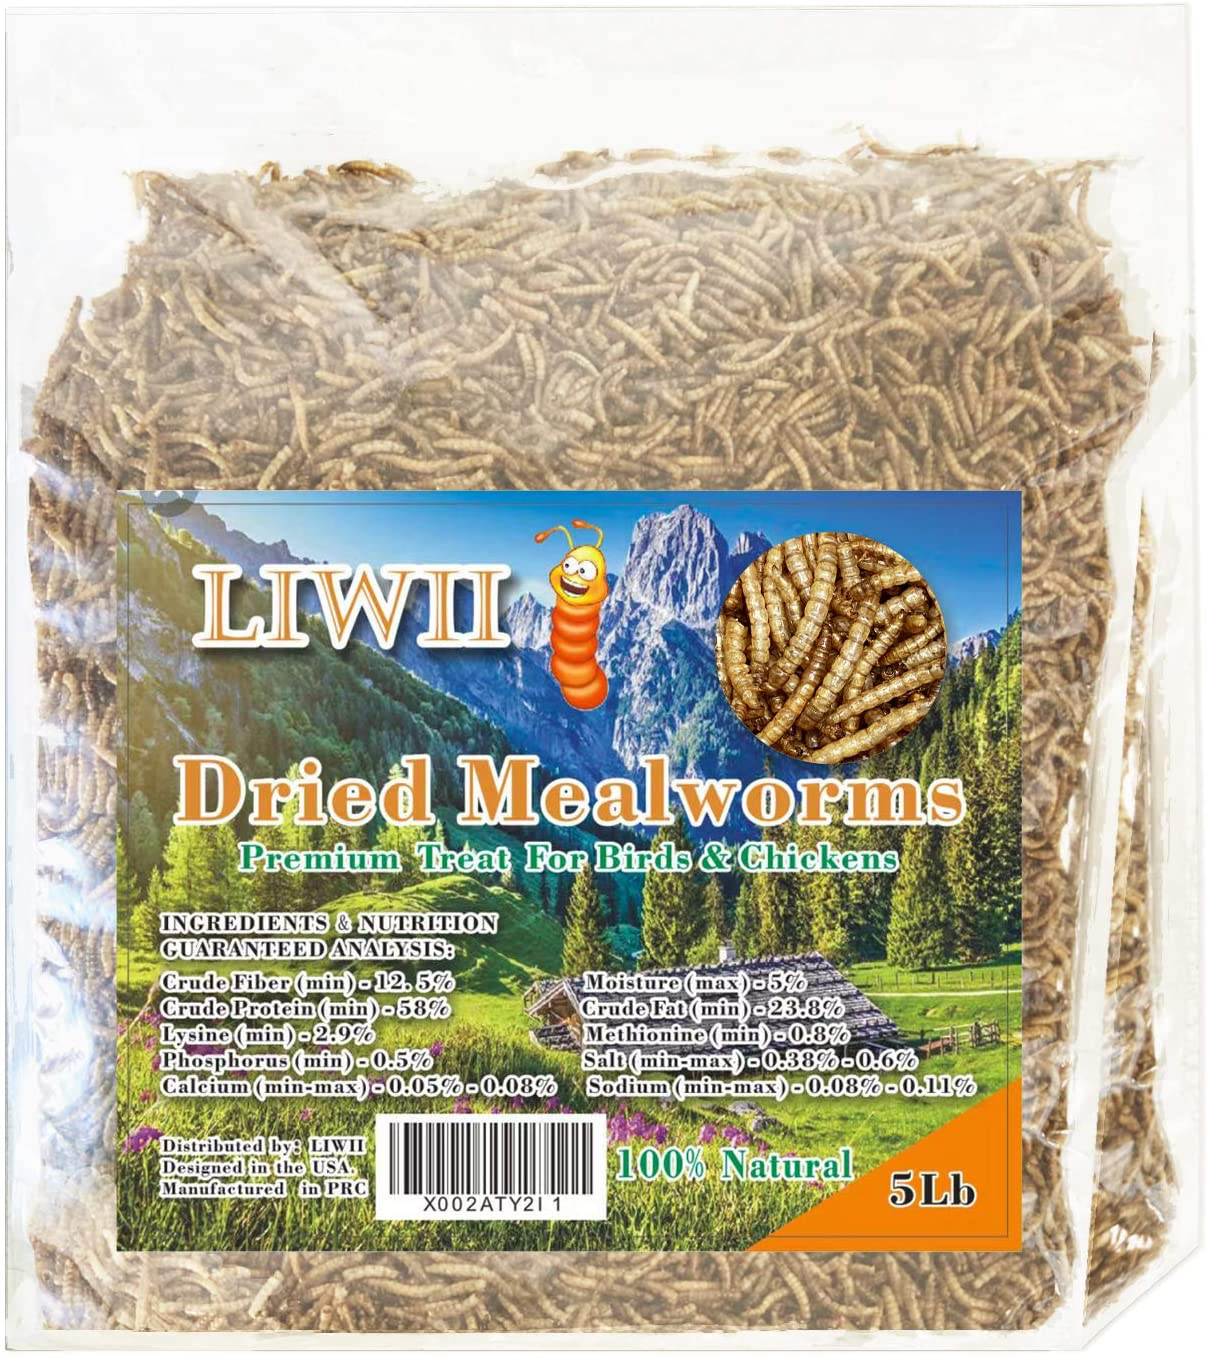 Dried Mealworms -5 LBS- 100% Natural Non GMO High Protein Mealworms - Bulk Mealworms for Wild Birds, Chicken Treats, Hamster Food, Gecko Food, Turtle Food, Lizard Food